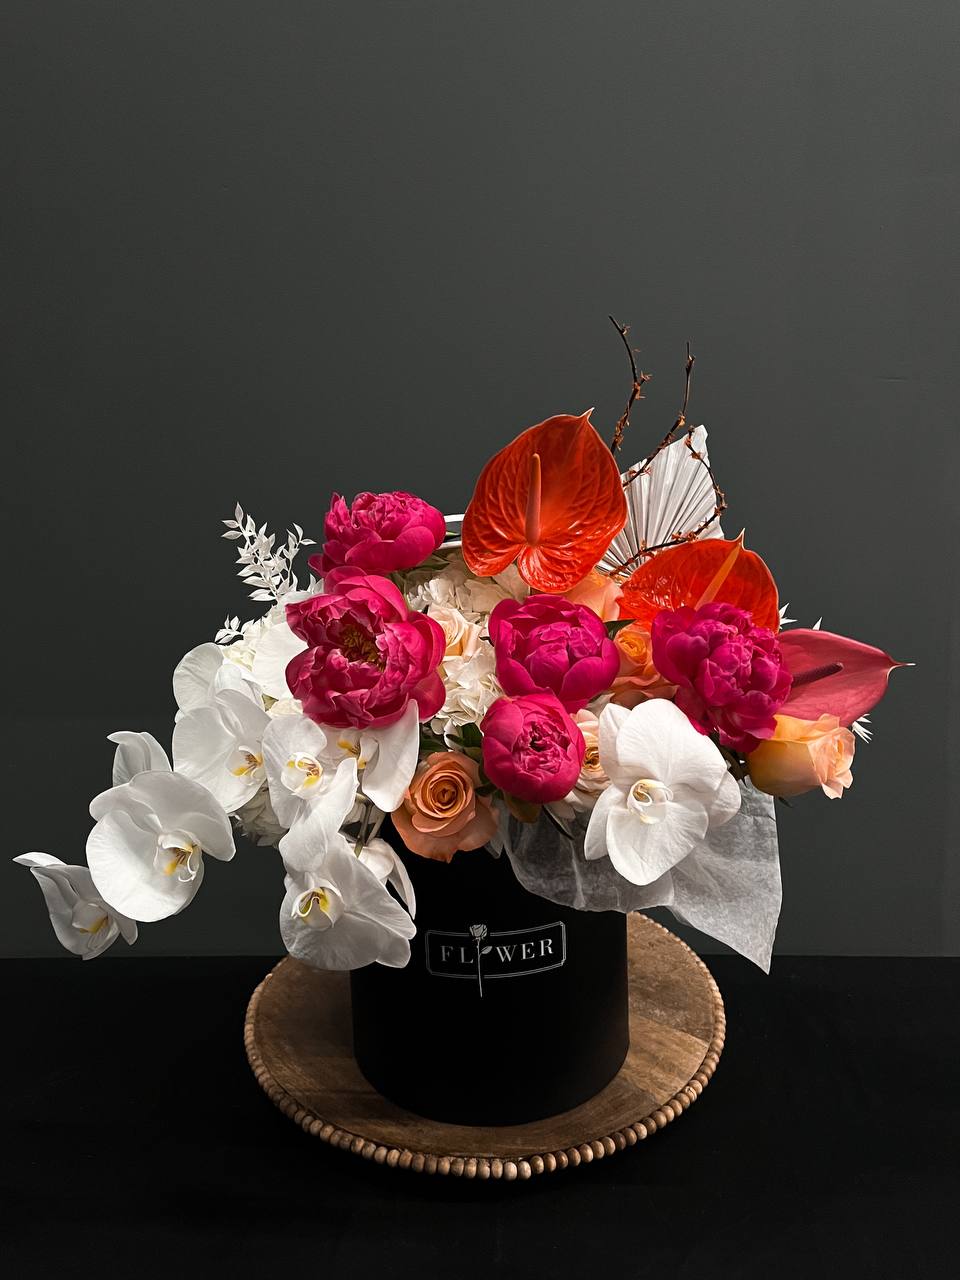 Florist Selection - Bouquet  will be delivered approximately as pictured